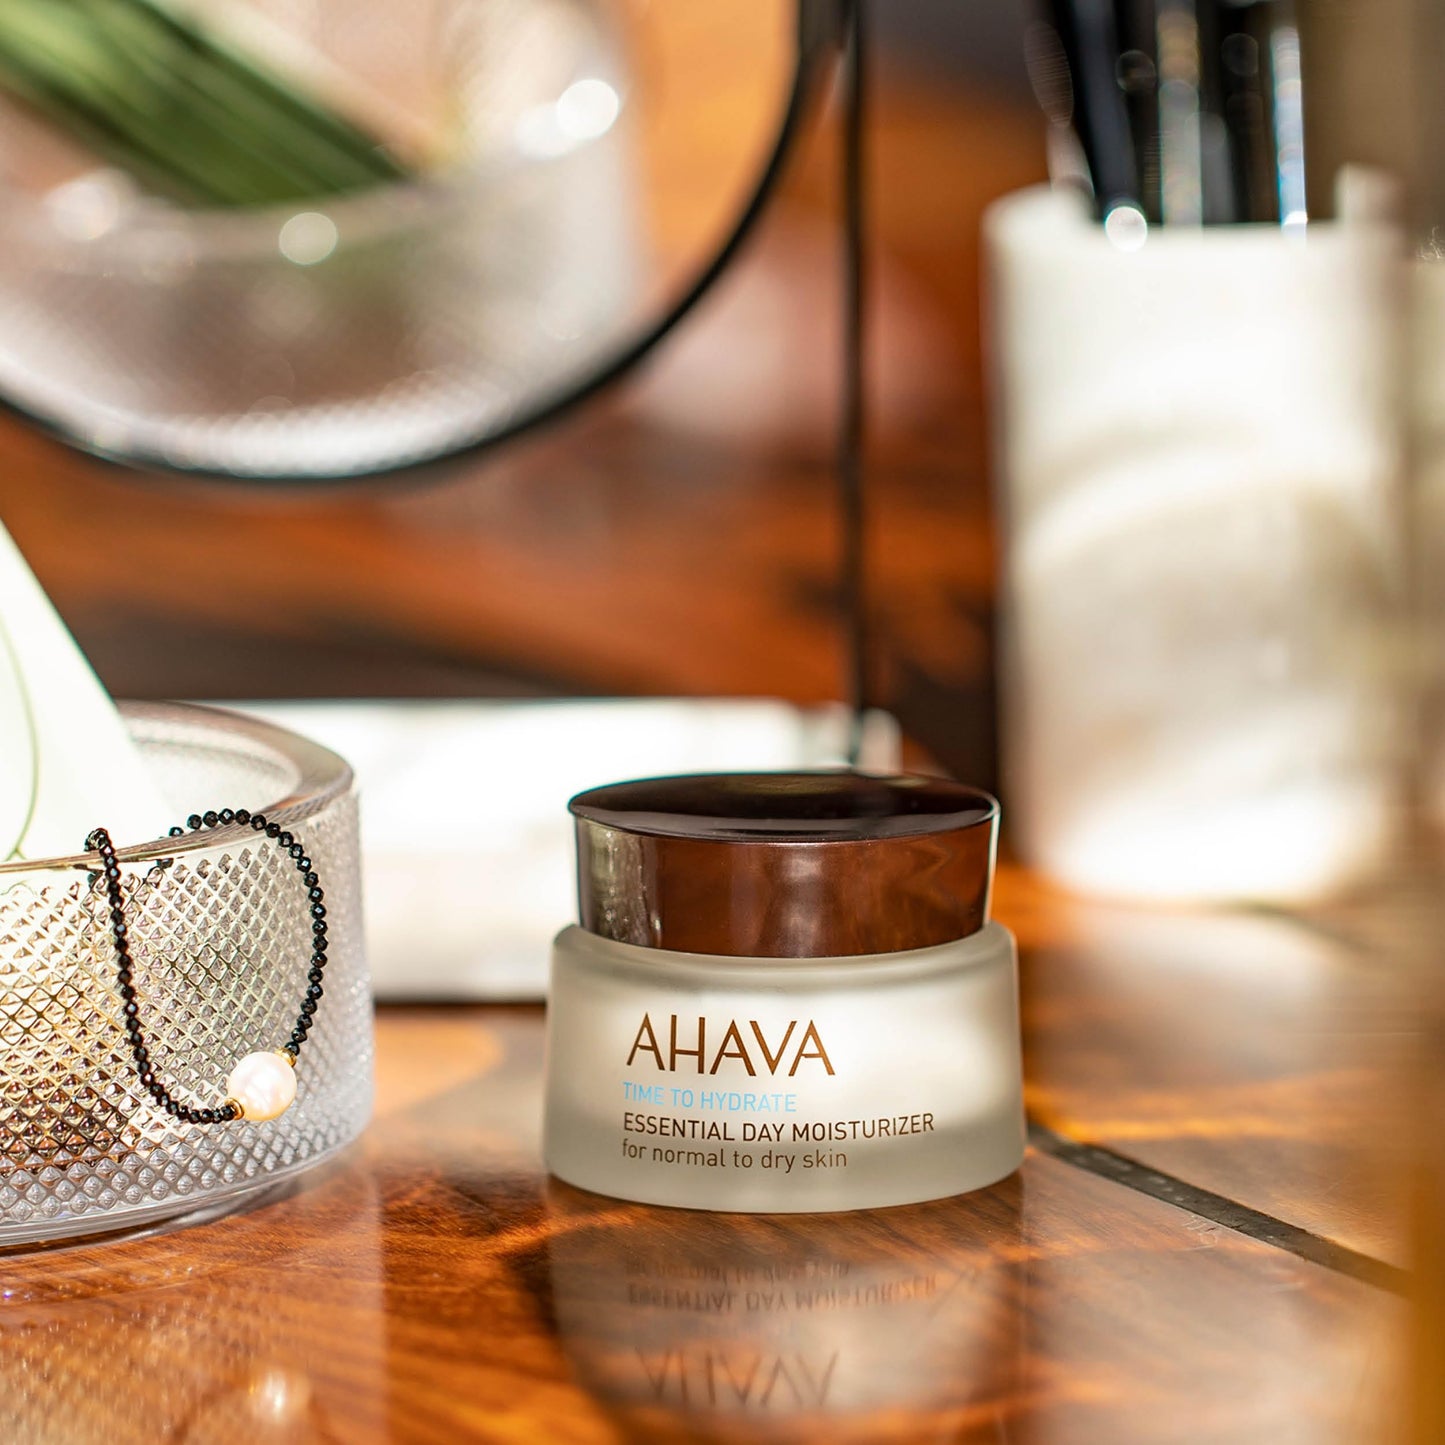 AHAVA Essential Day Moisturizer, Normal to Dry Skin - Essential Daily Hydrating Facial & Neck Cream, Anti-Aging & Smoothing Effect, Enriched with Osmoter, Aloe Vera, Allantoin & Vitamin E, 1.7 Fl.Oz